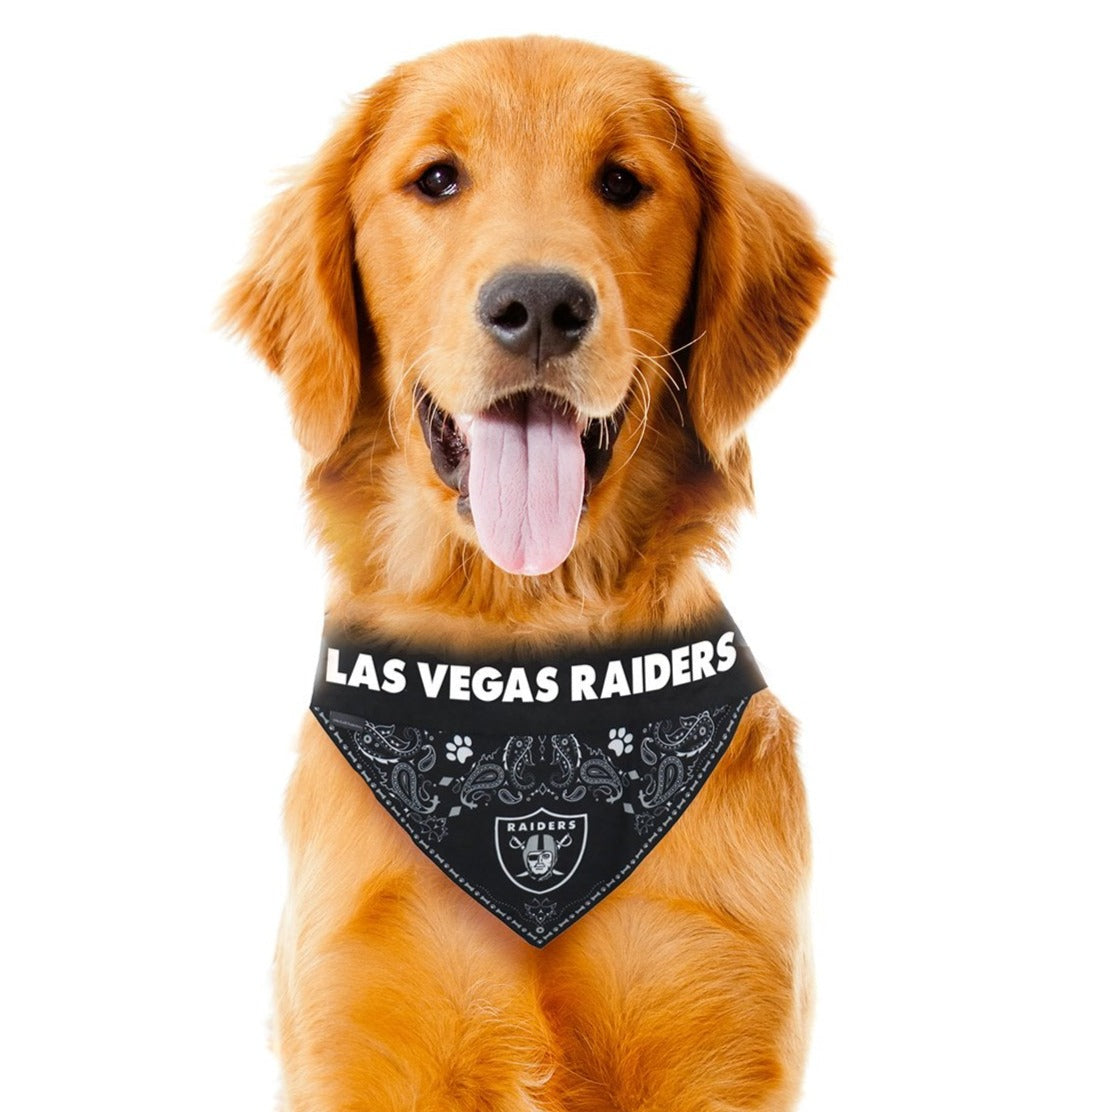 San Diego Padres Dog Jerseys, Padres Pet Carriers, Harness, Bandanas,  Leashes